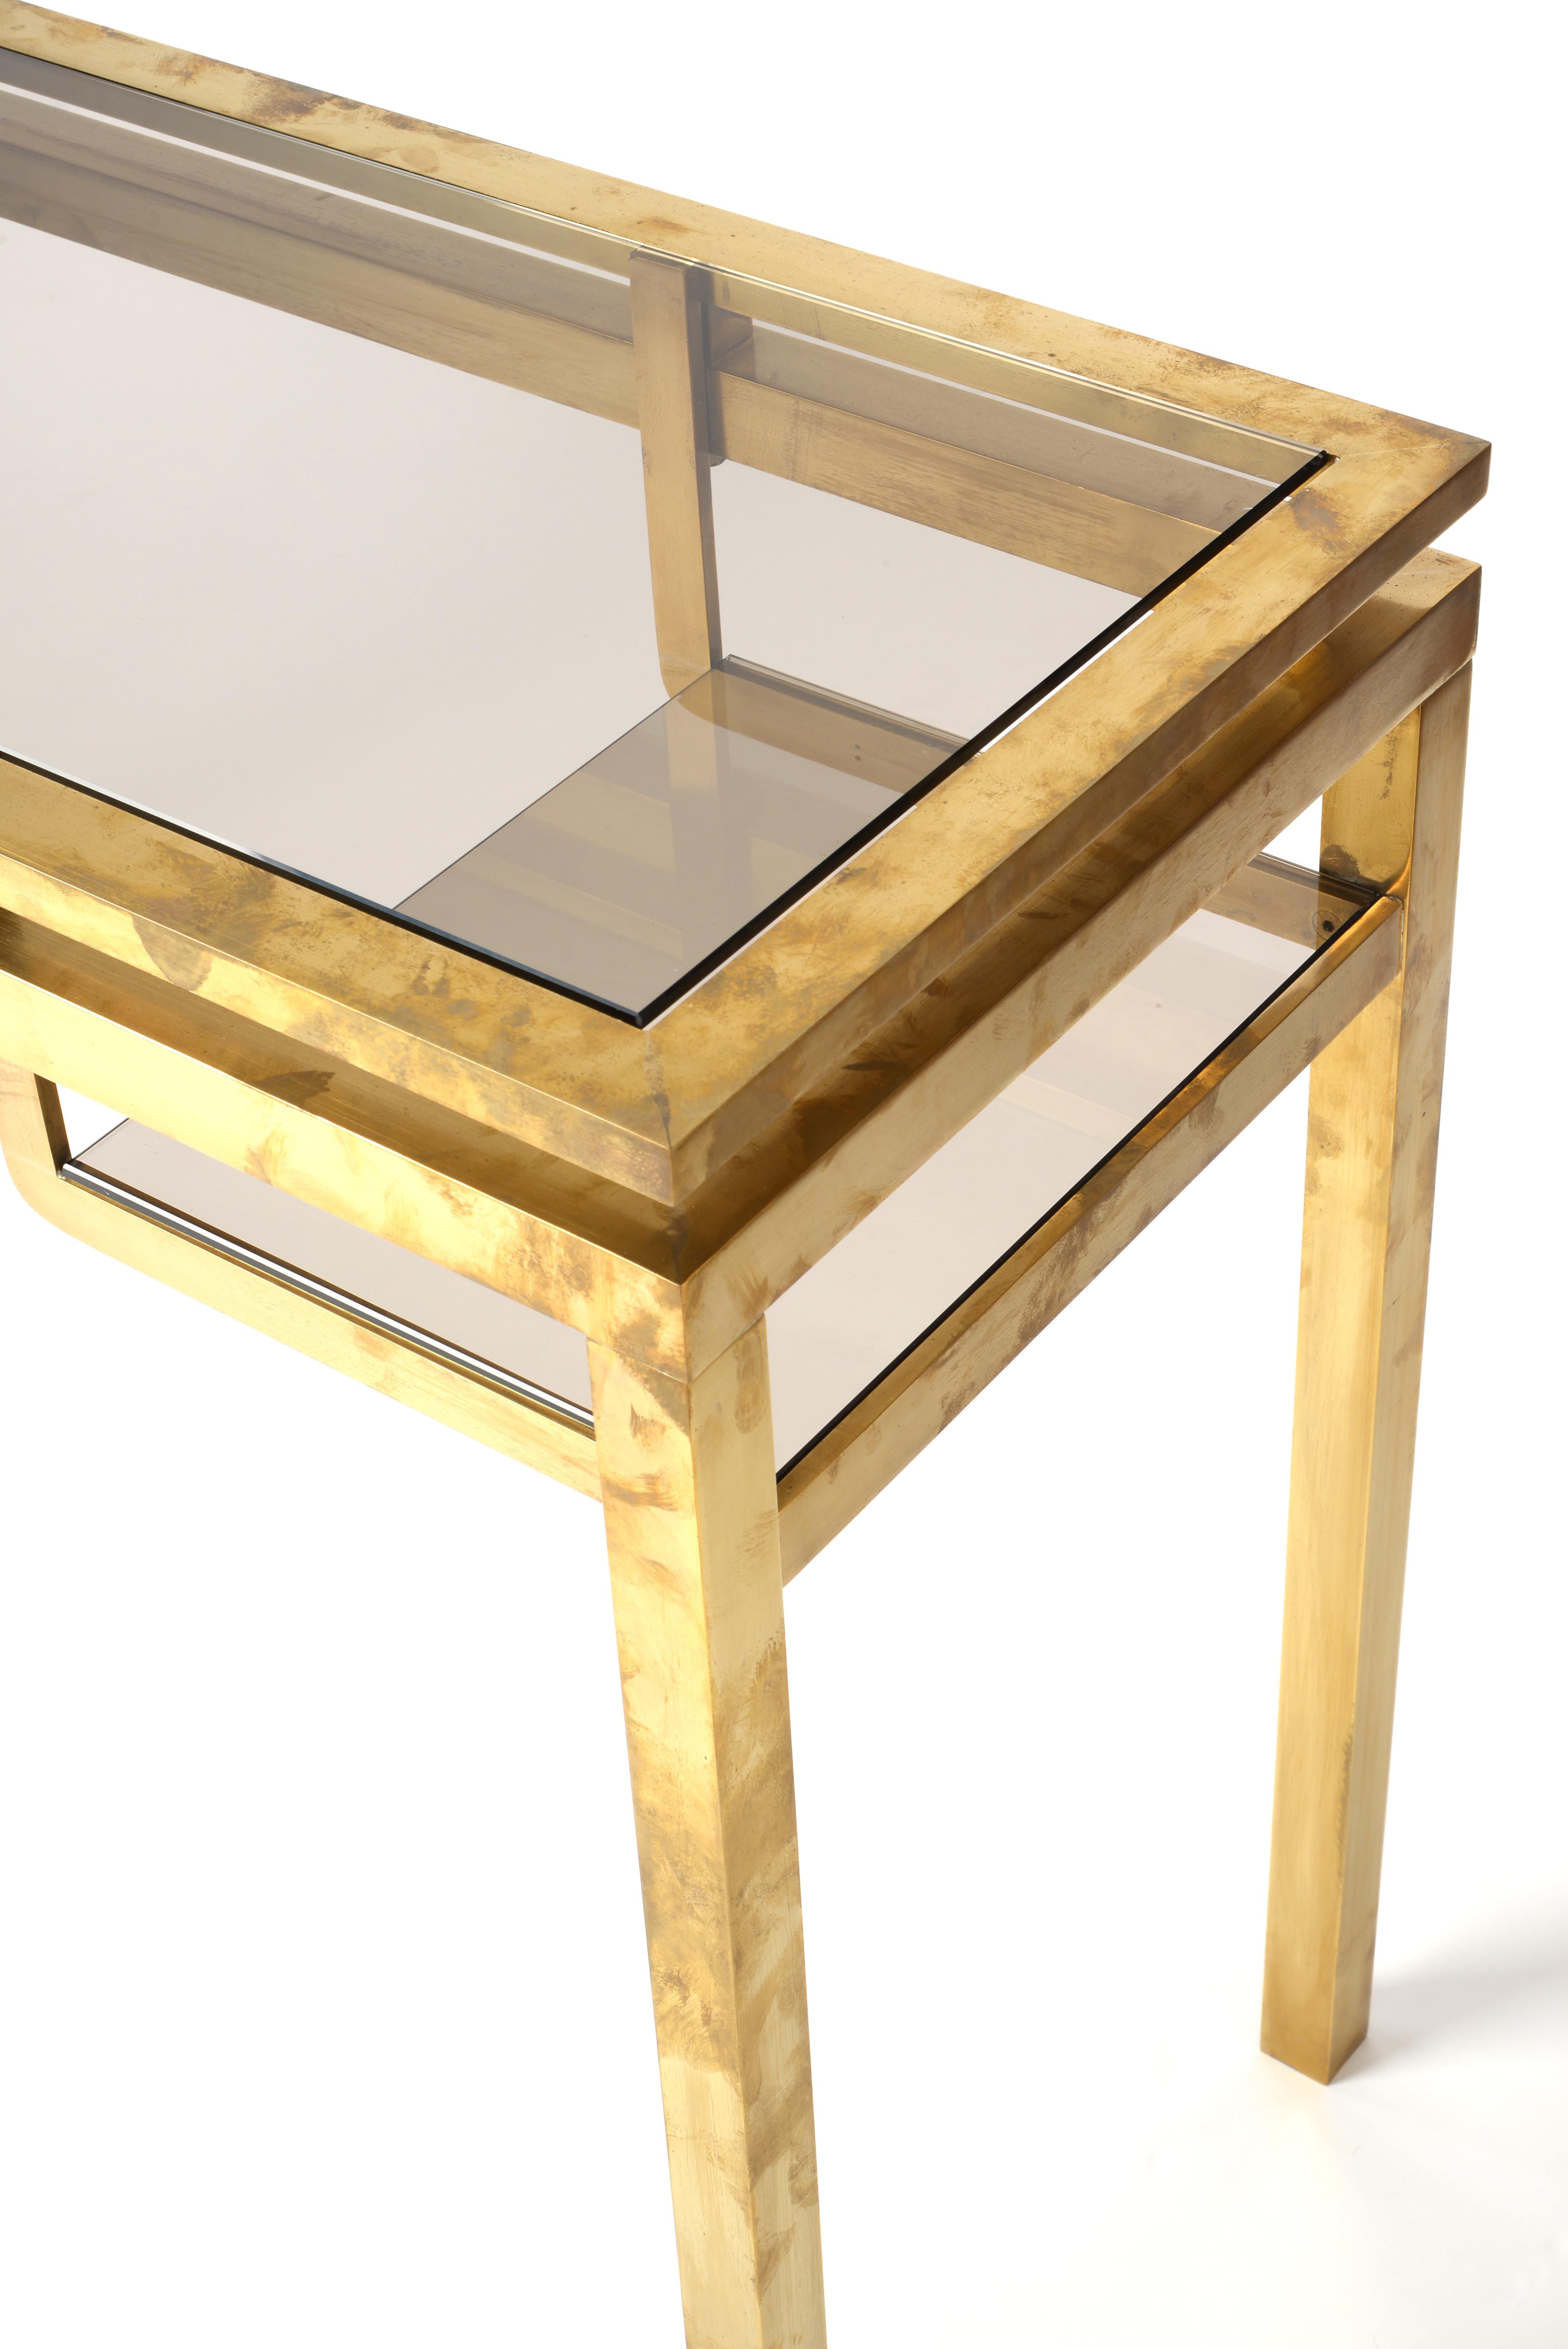 This stunning 1970s console table by Guy Lefevre features Lefevre's iconic gilded metal with its timeless contours. A large smoked glass top seamlessly blinds in with the structure and offers enough space for decoration. Below the top there are two